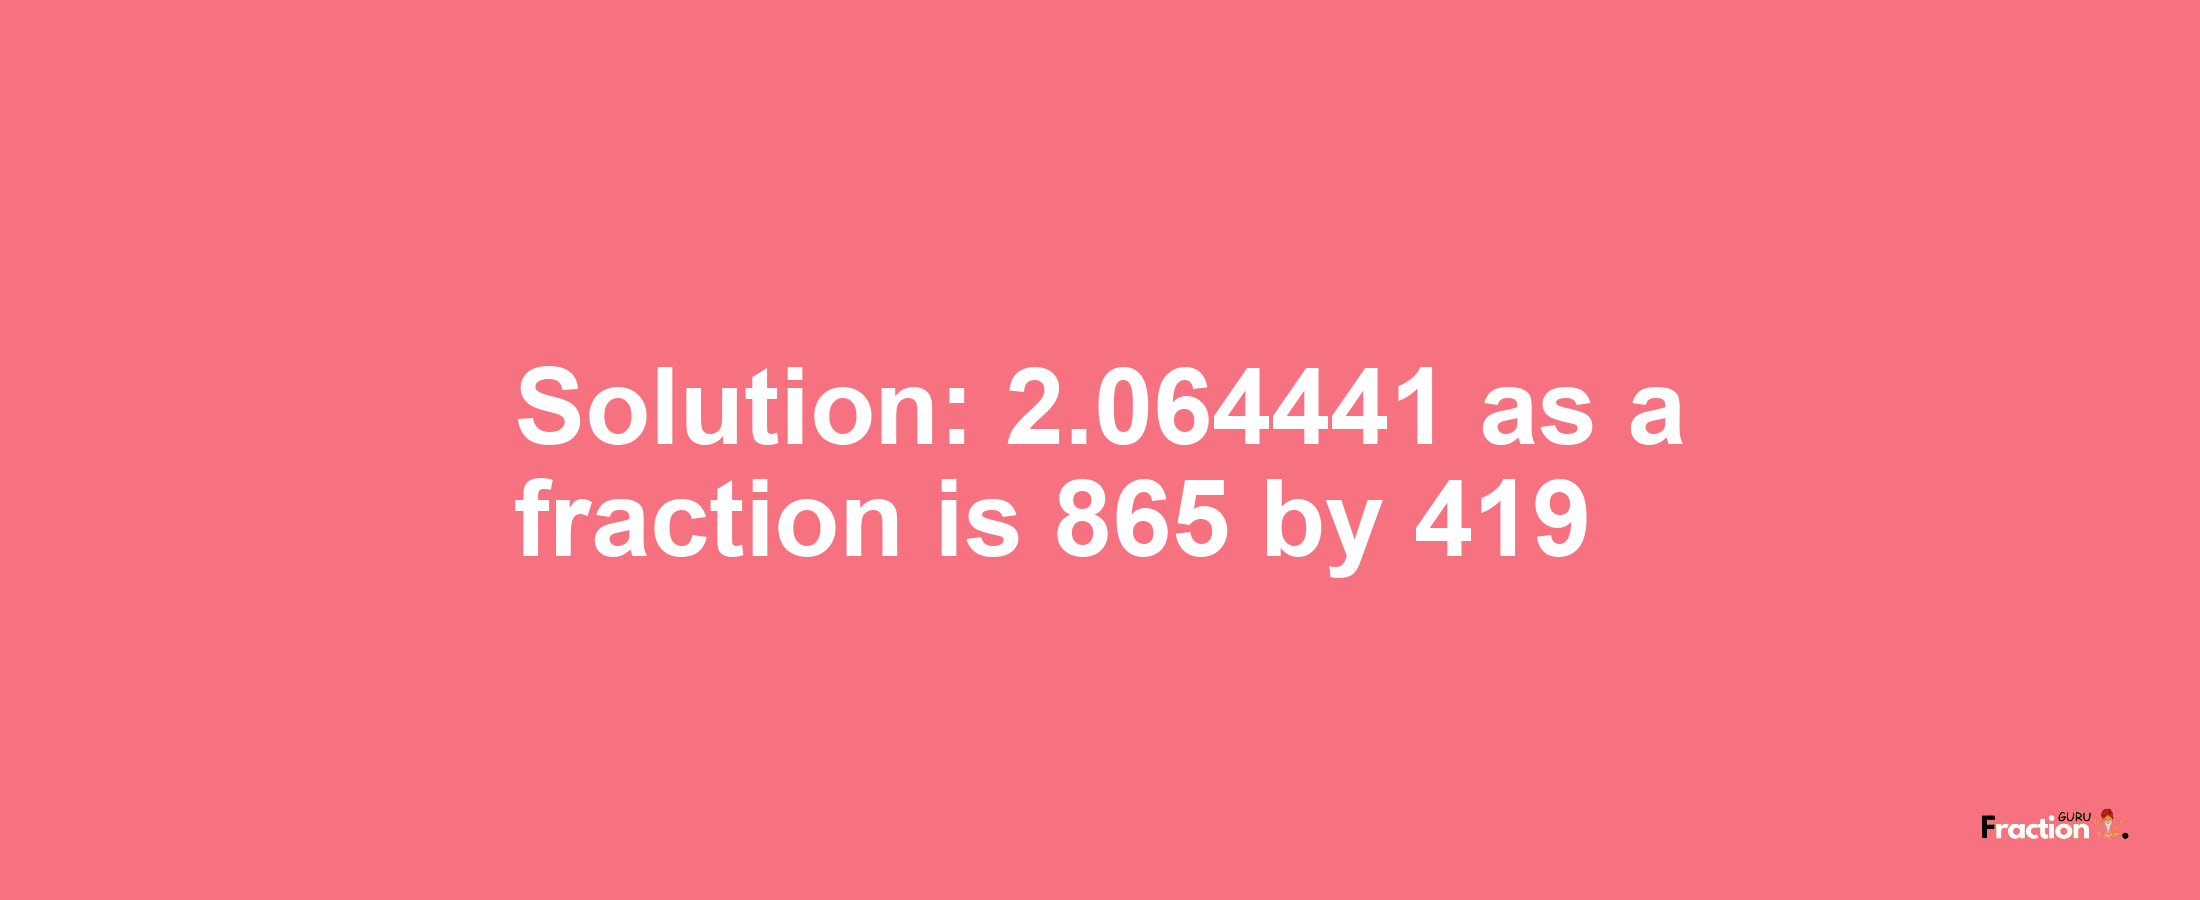 Solution:2.064441 as a fraction is 865/419